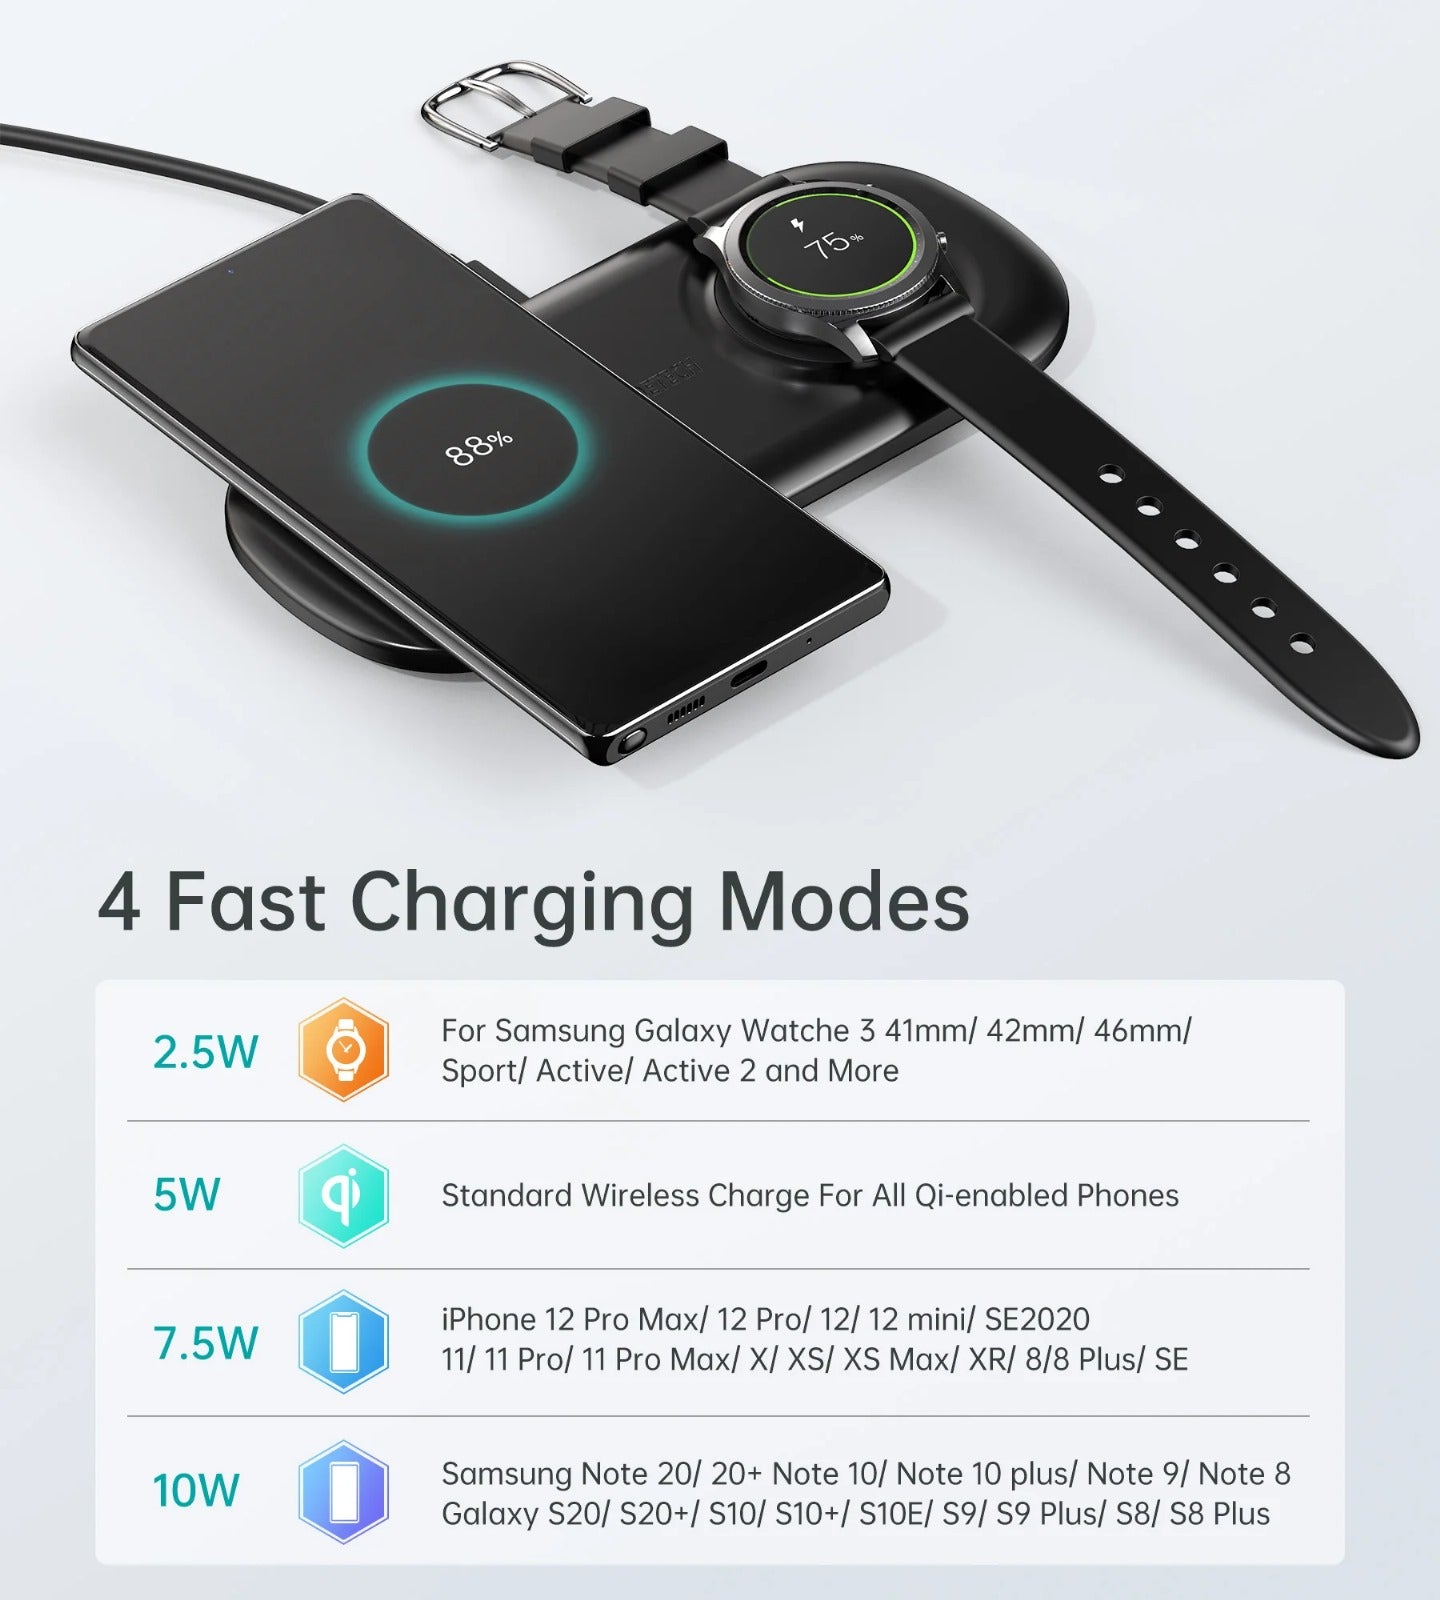 Choetech 2 in 1 Wireless Charger, 10W Max Wireless Charging Pad with Adapter for Galaxy Watch - T570